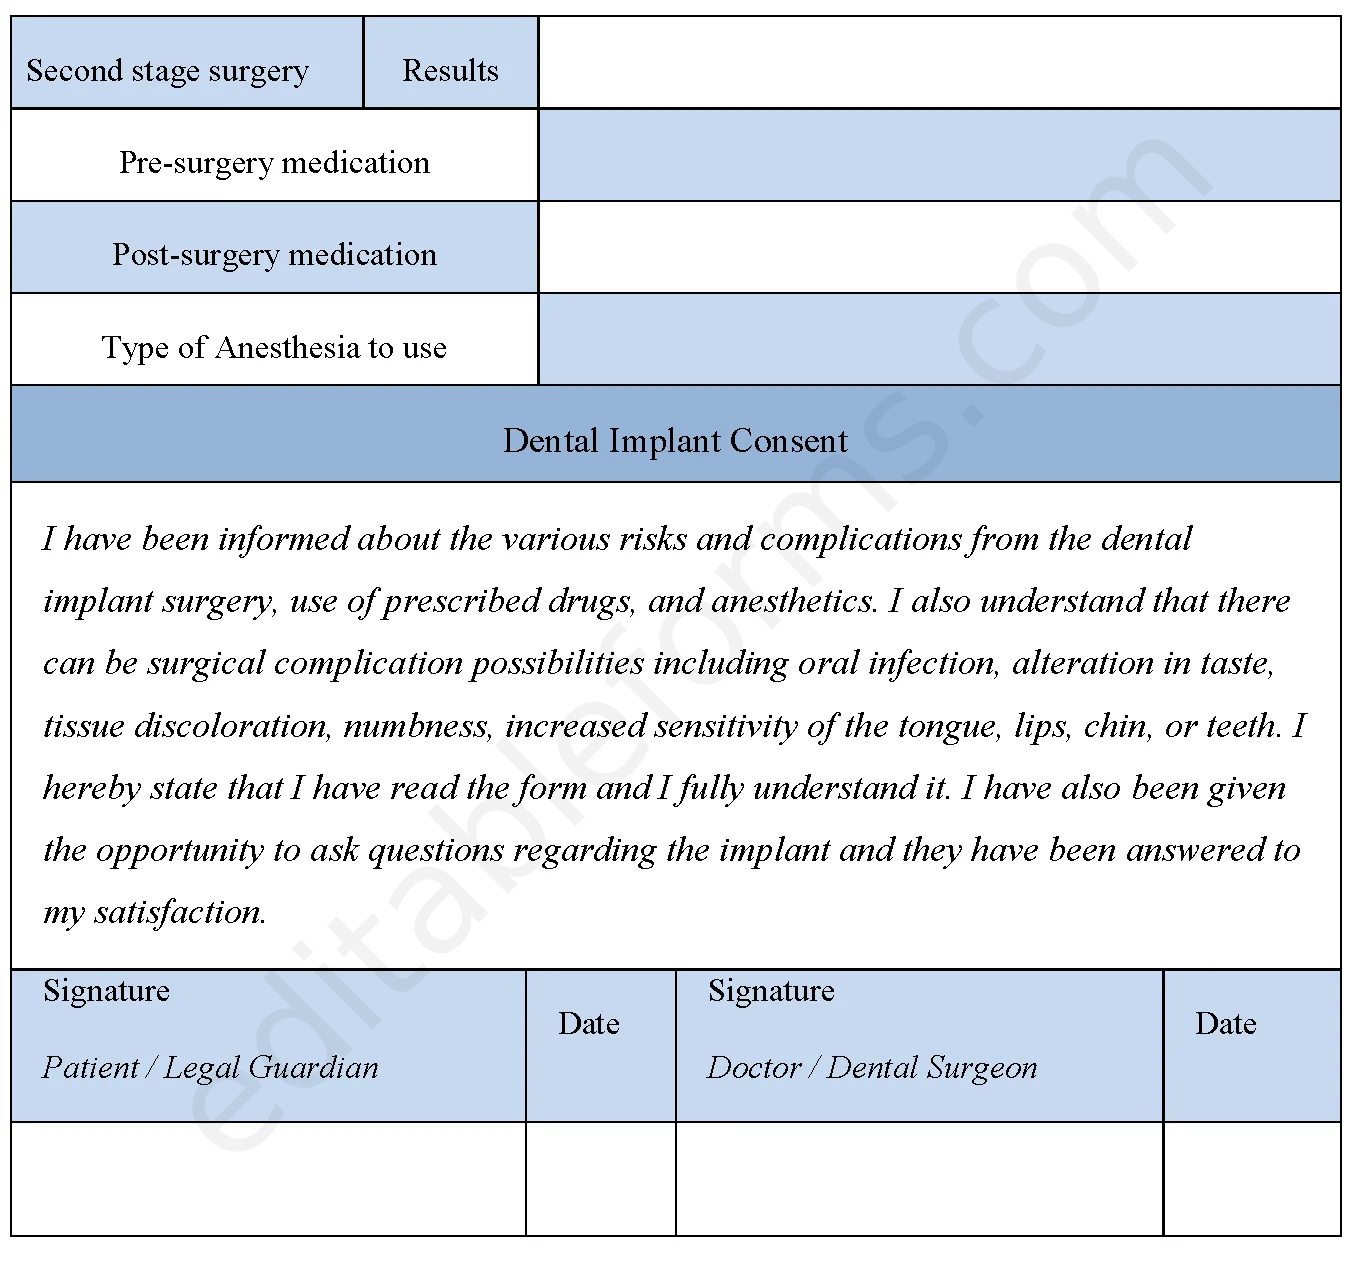 Dental Implant Consent Fillable PDF Template